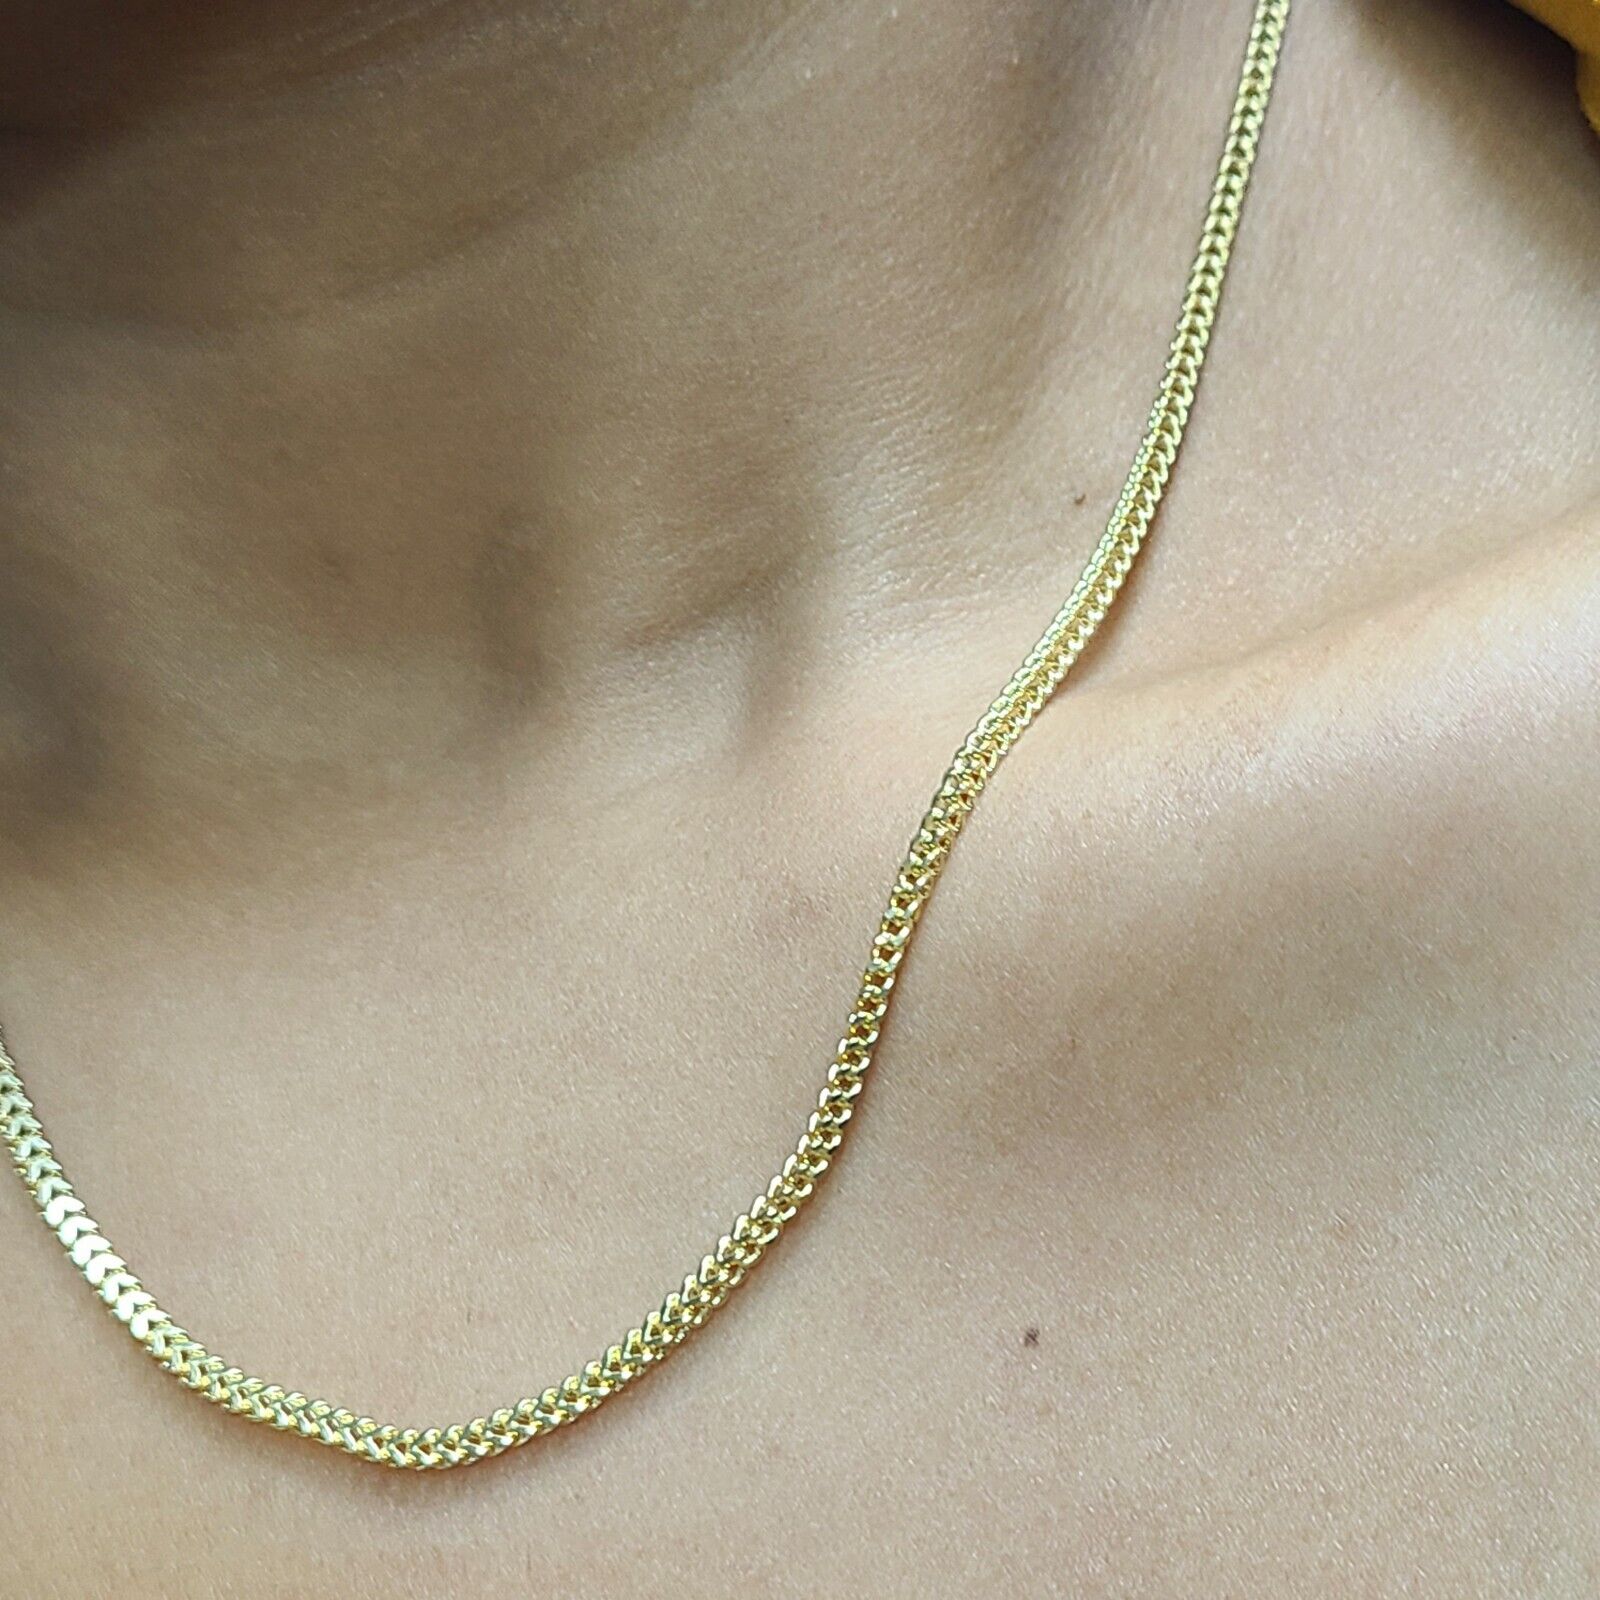 14K Yellow Gold Franco Chain 2.10mm wide Chain Necklace 20"